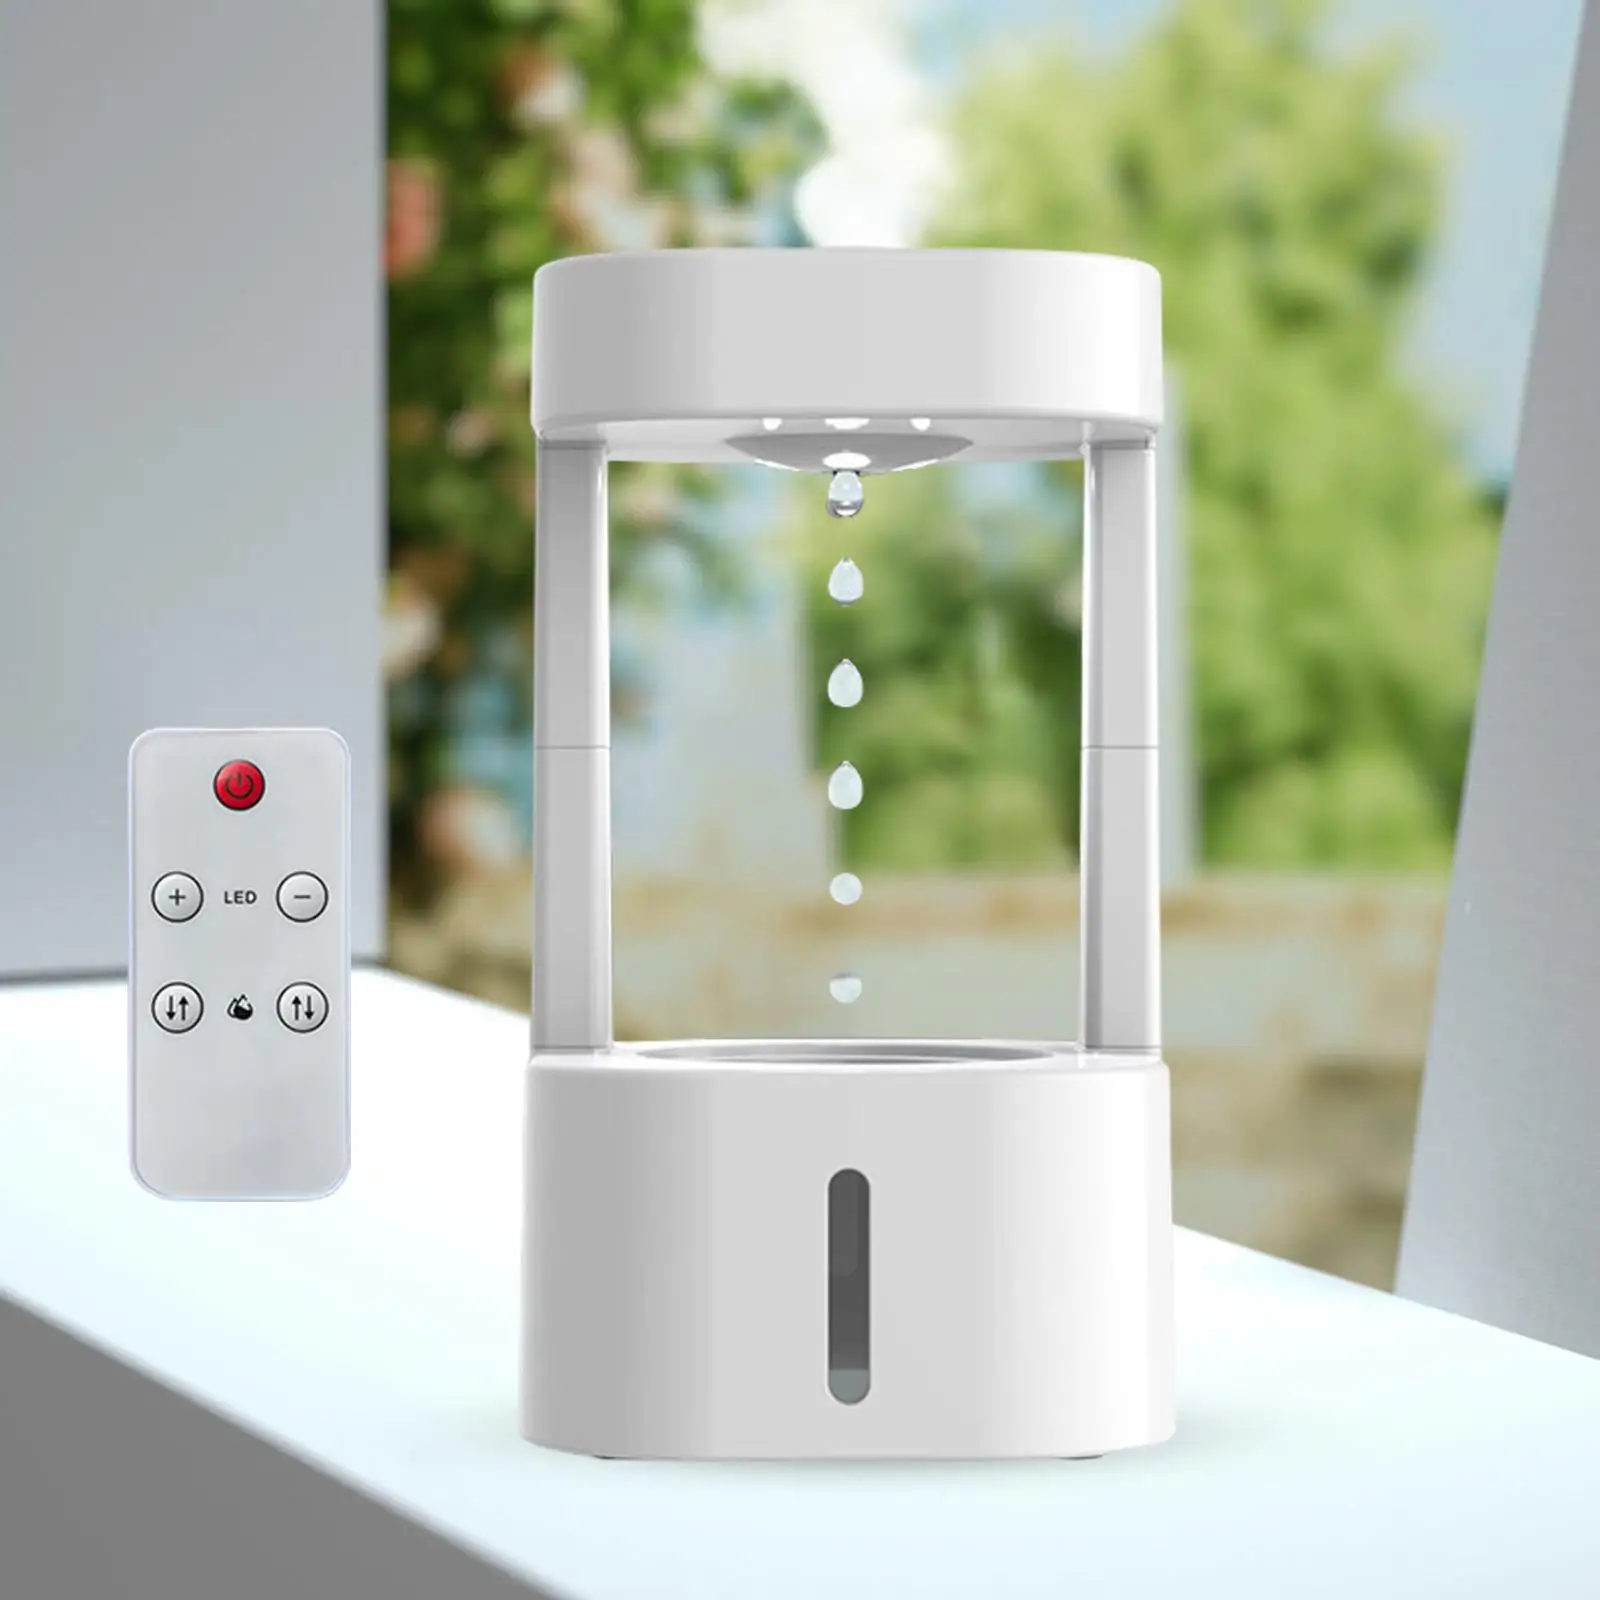 Portable Air Humidifier Diffuser Personal Levitating Water Drops Auto Shut Off Quiet Night Light USB for NightStand